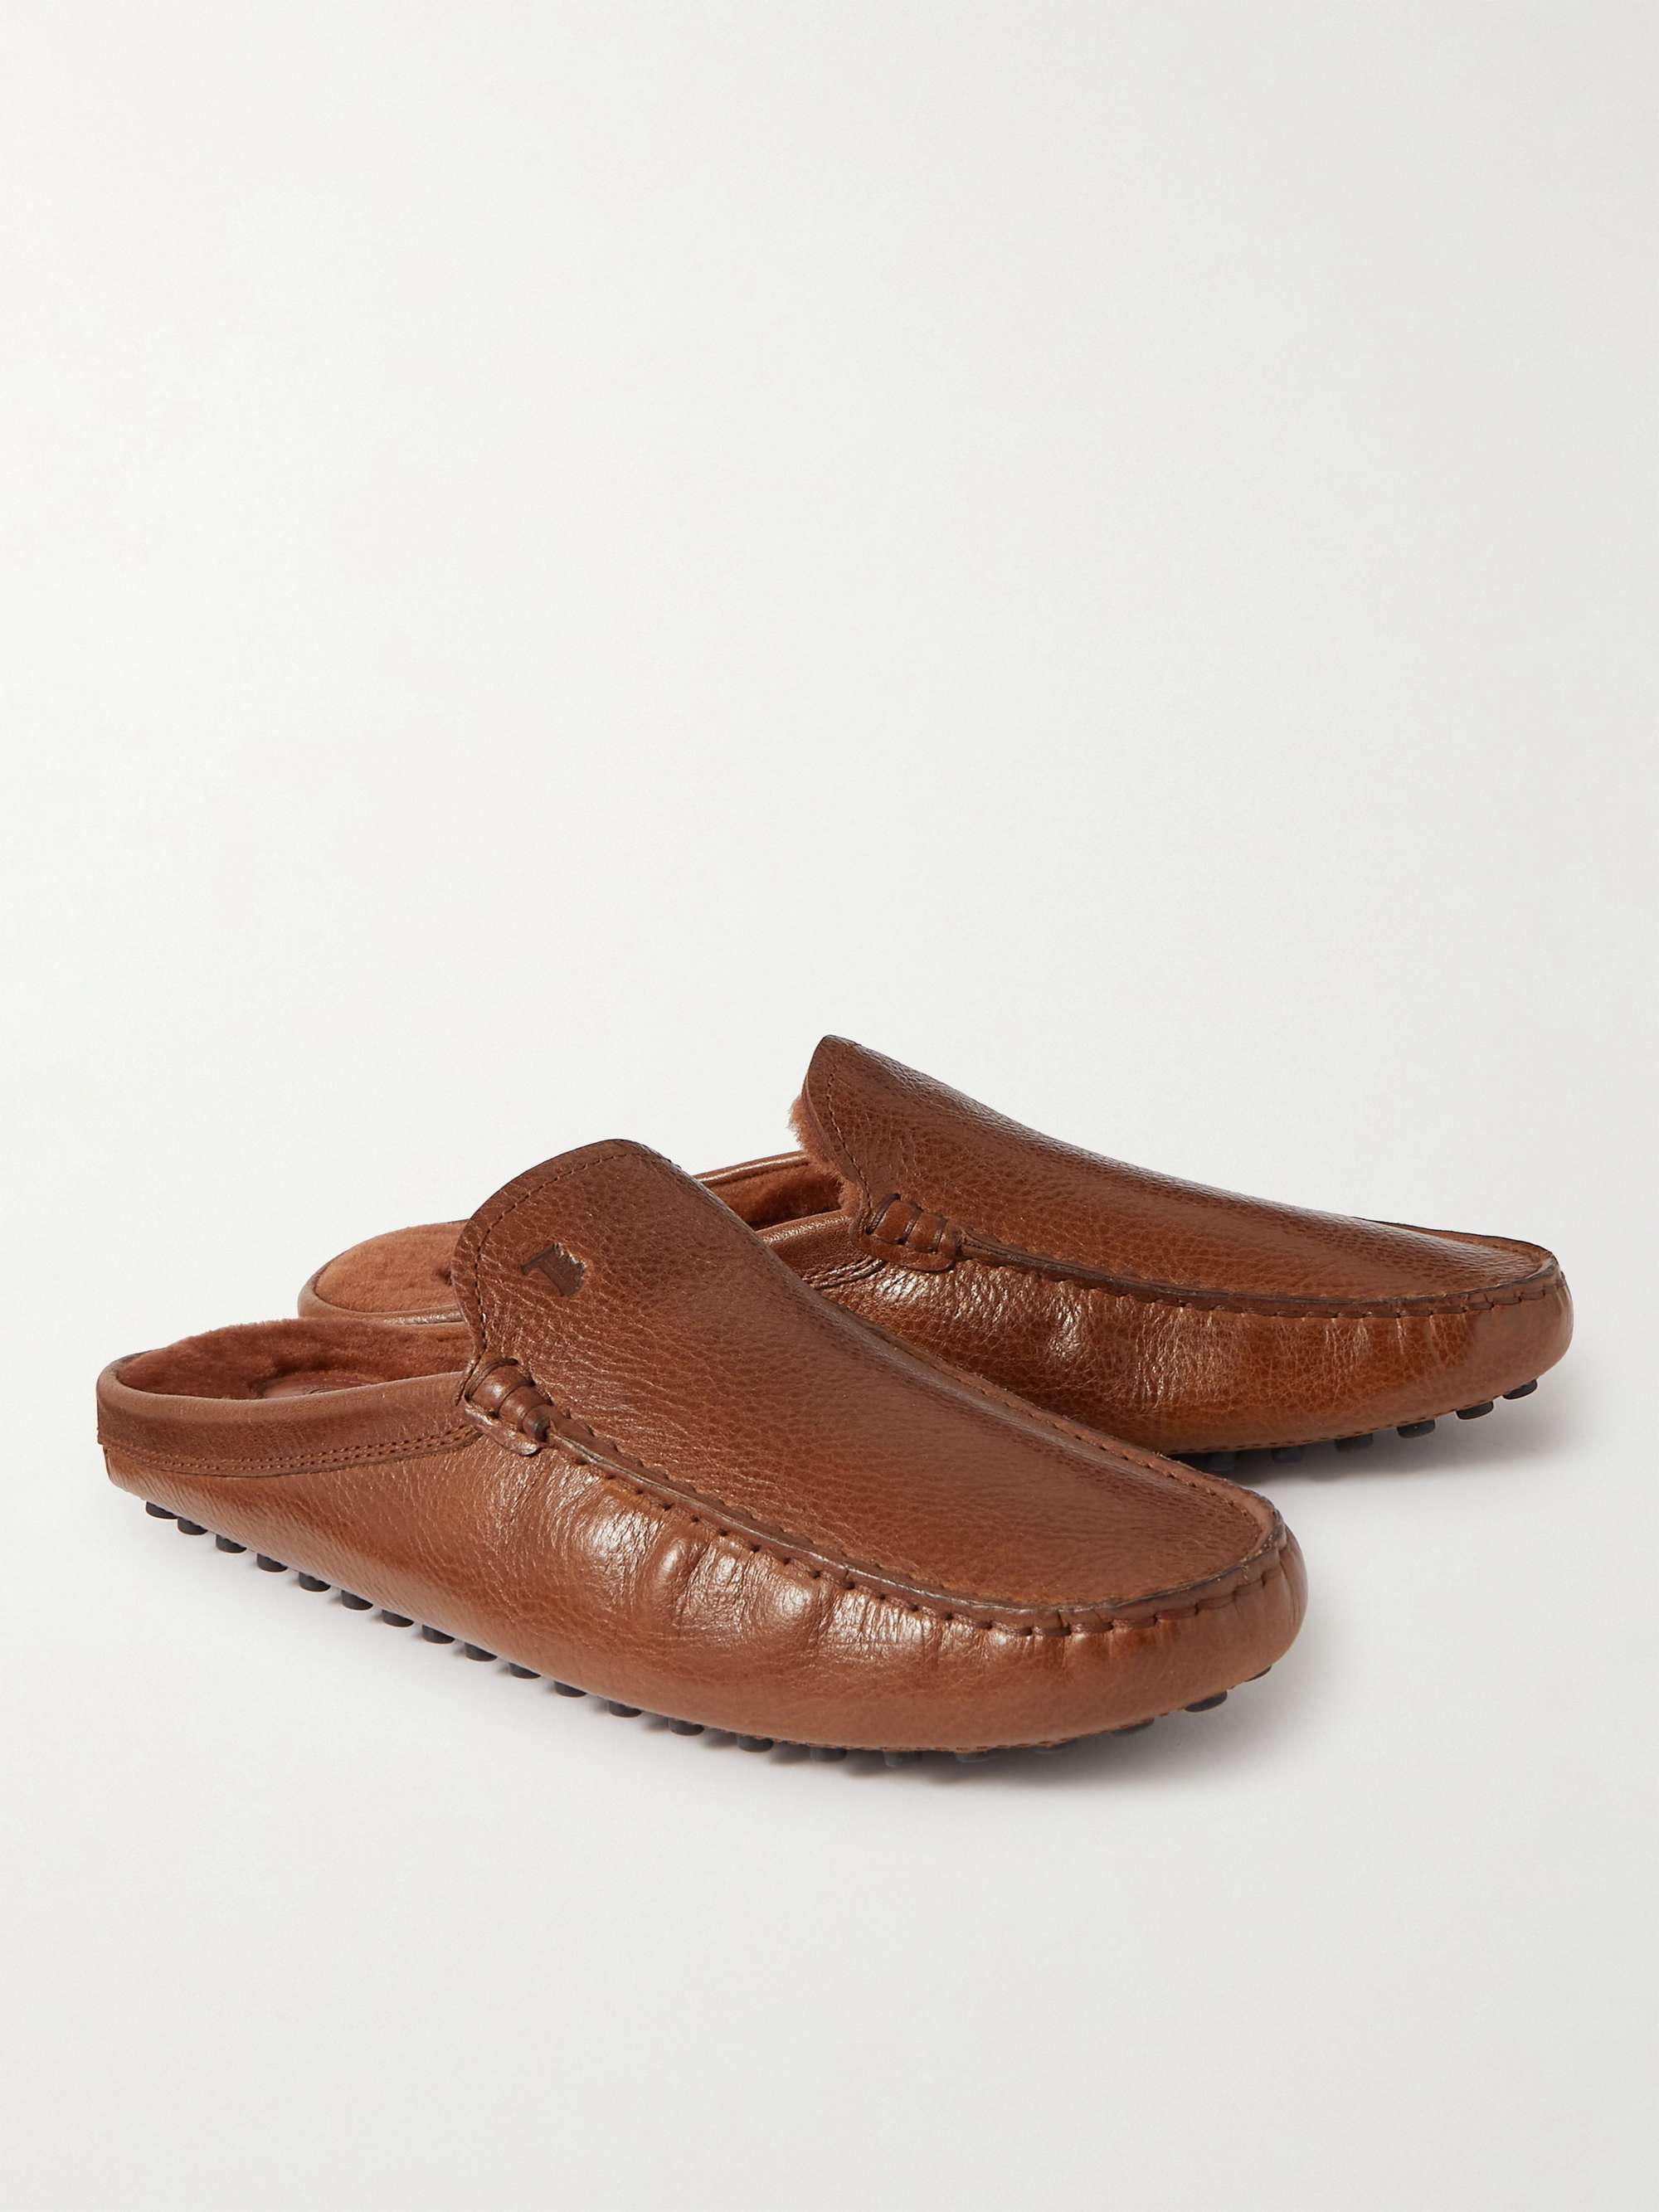 TOD'S Shearling-Lined Full-Grain Leather Slippers